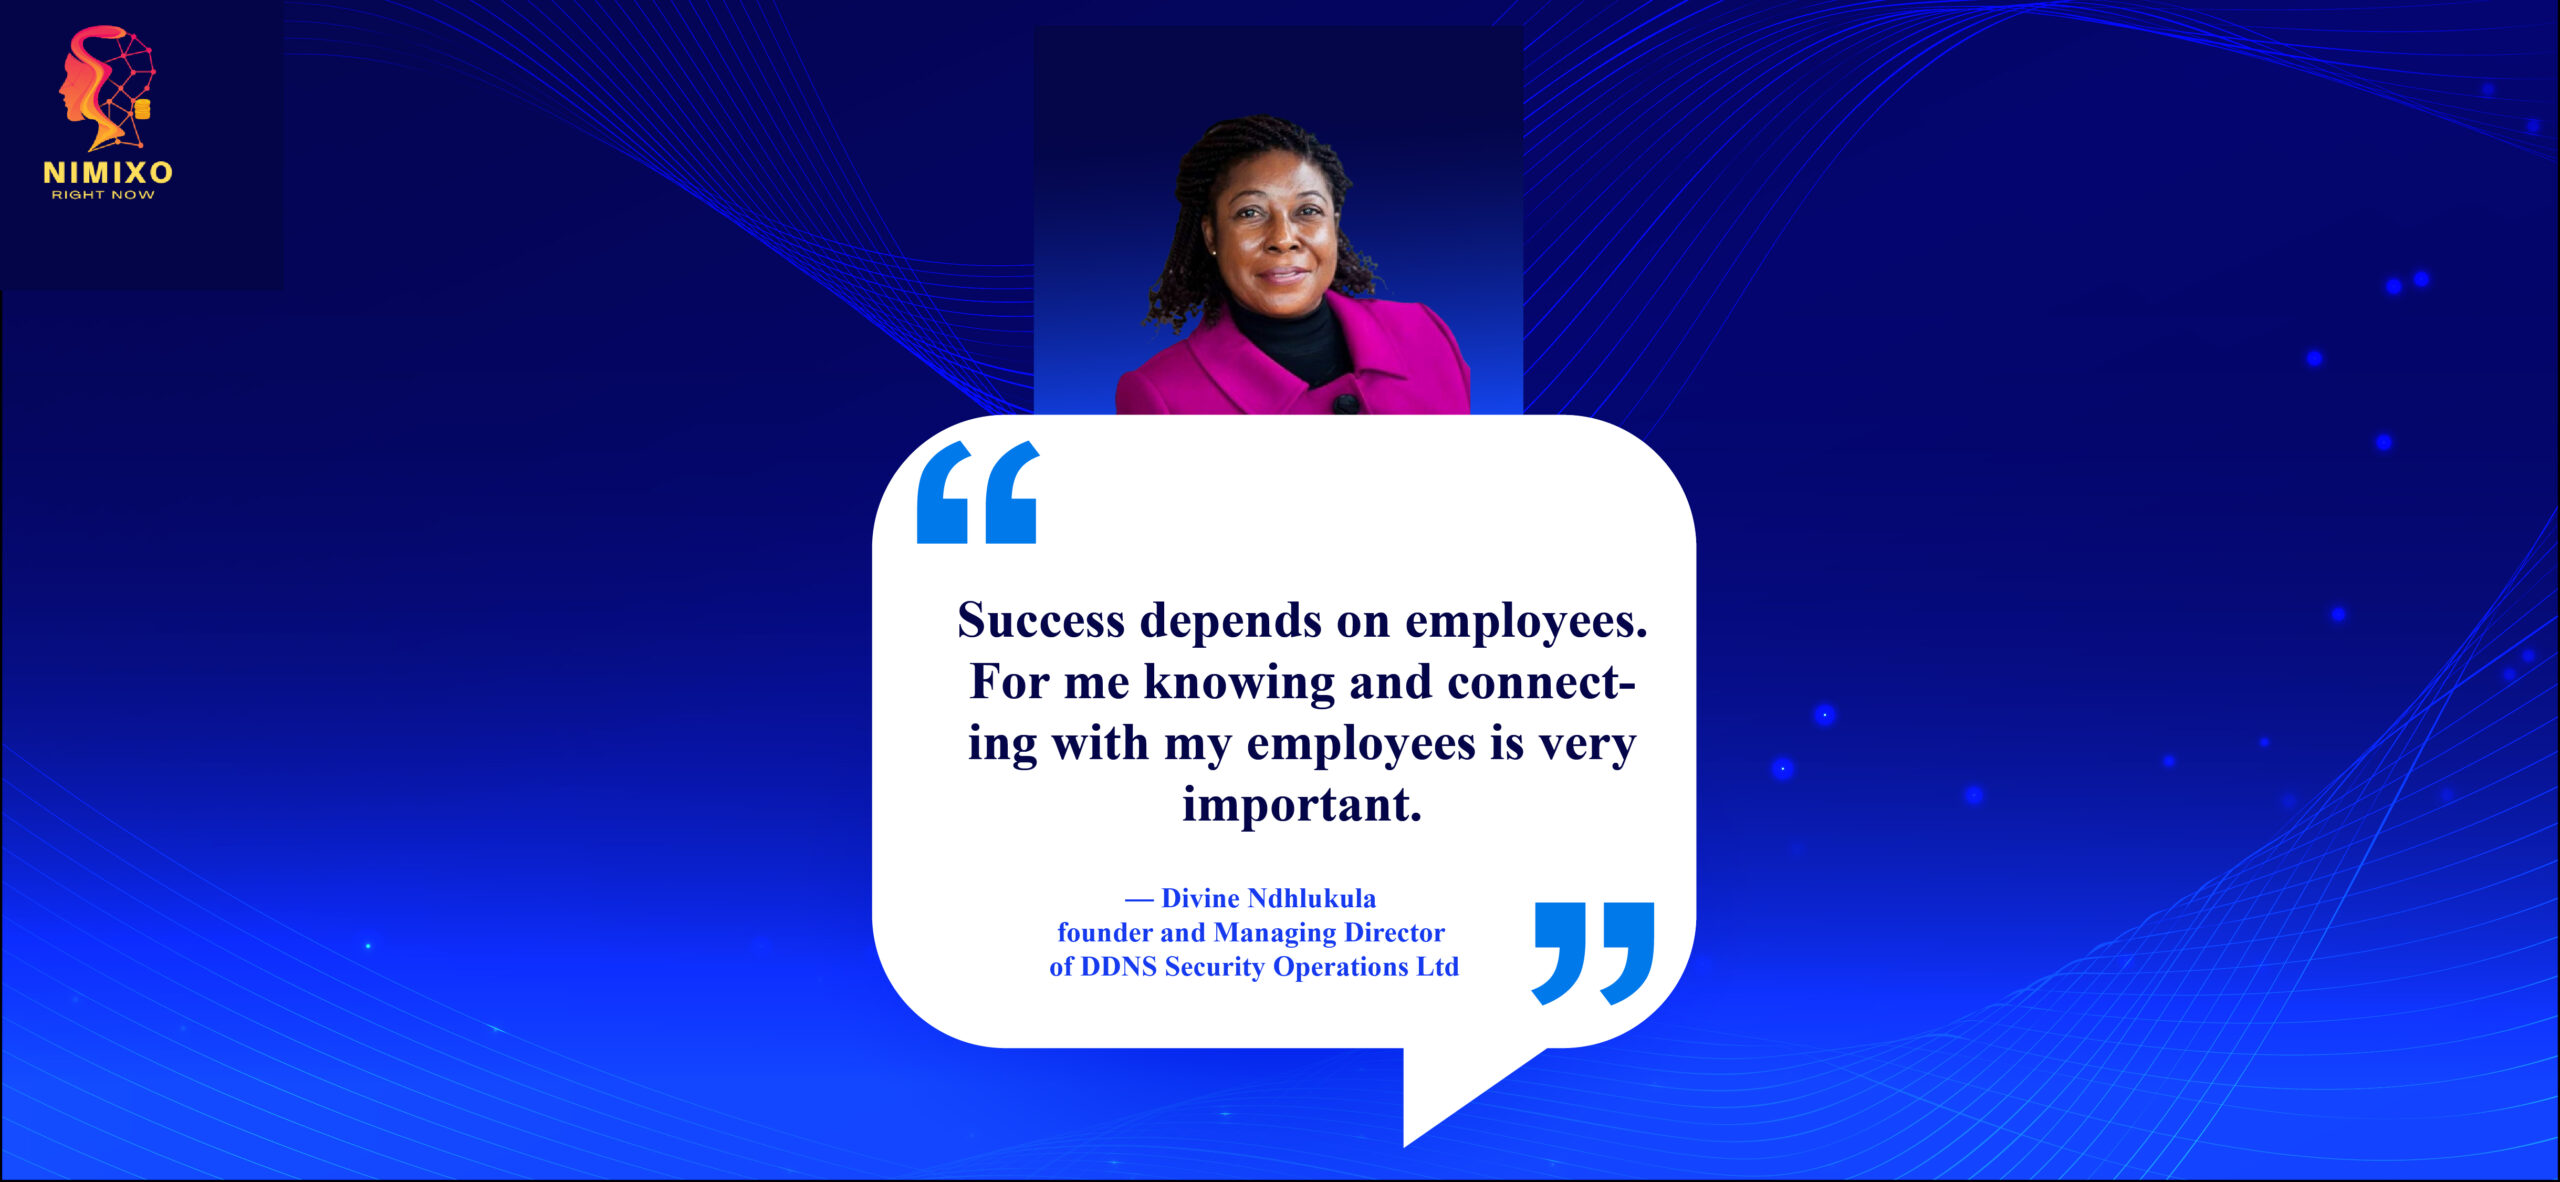 Flourishing From Within: How to Cultivate a Workforce Where Employees Thrive. Success depends on employees. For me knowing and connecting with my employees is very important. -Divine Ndhlukula, founder and managing director of DDNS Security Operations Ltd